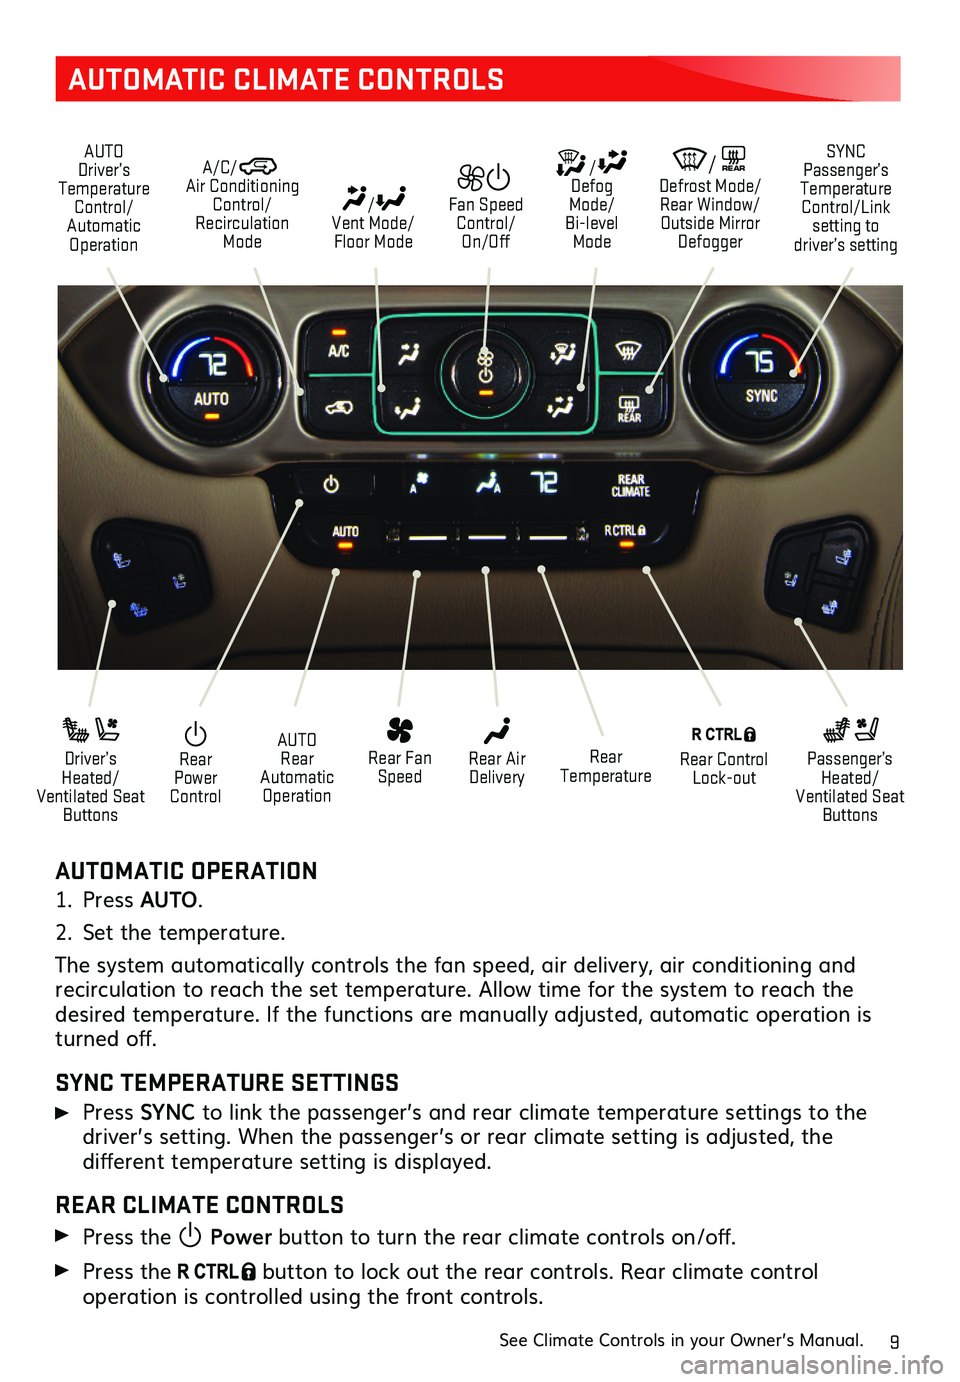 GMC YUKON XL 2019  Get To Know Guide 9
AUTOMATIC CLIMATE CONTROLS
AUTOMATIC OPERATION
1. Press AUTO.
2. Set the temperature. 
The system automatically   controls the fan speed, air delivery, air conditioning and recirculation to reach th